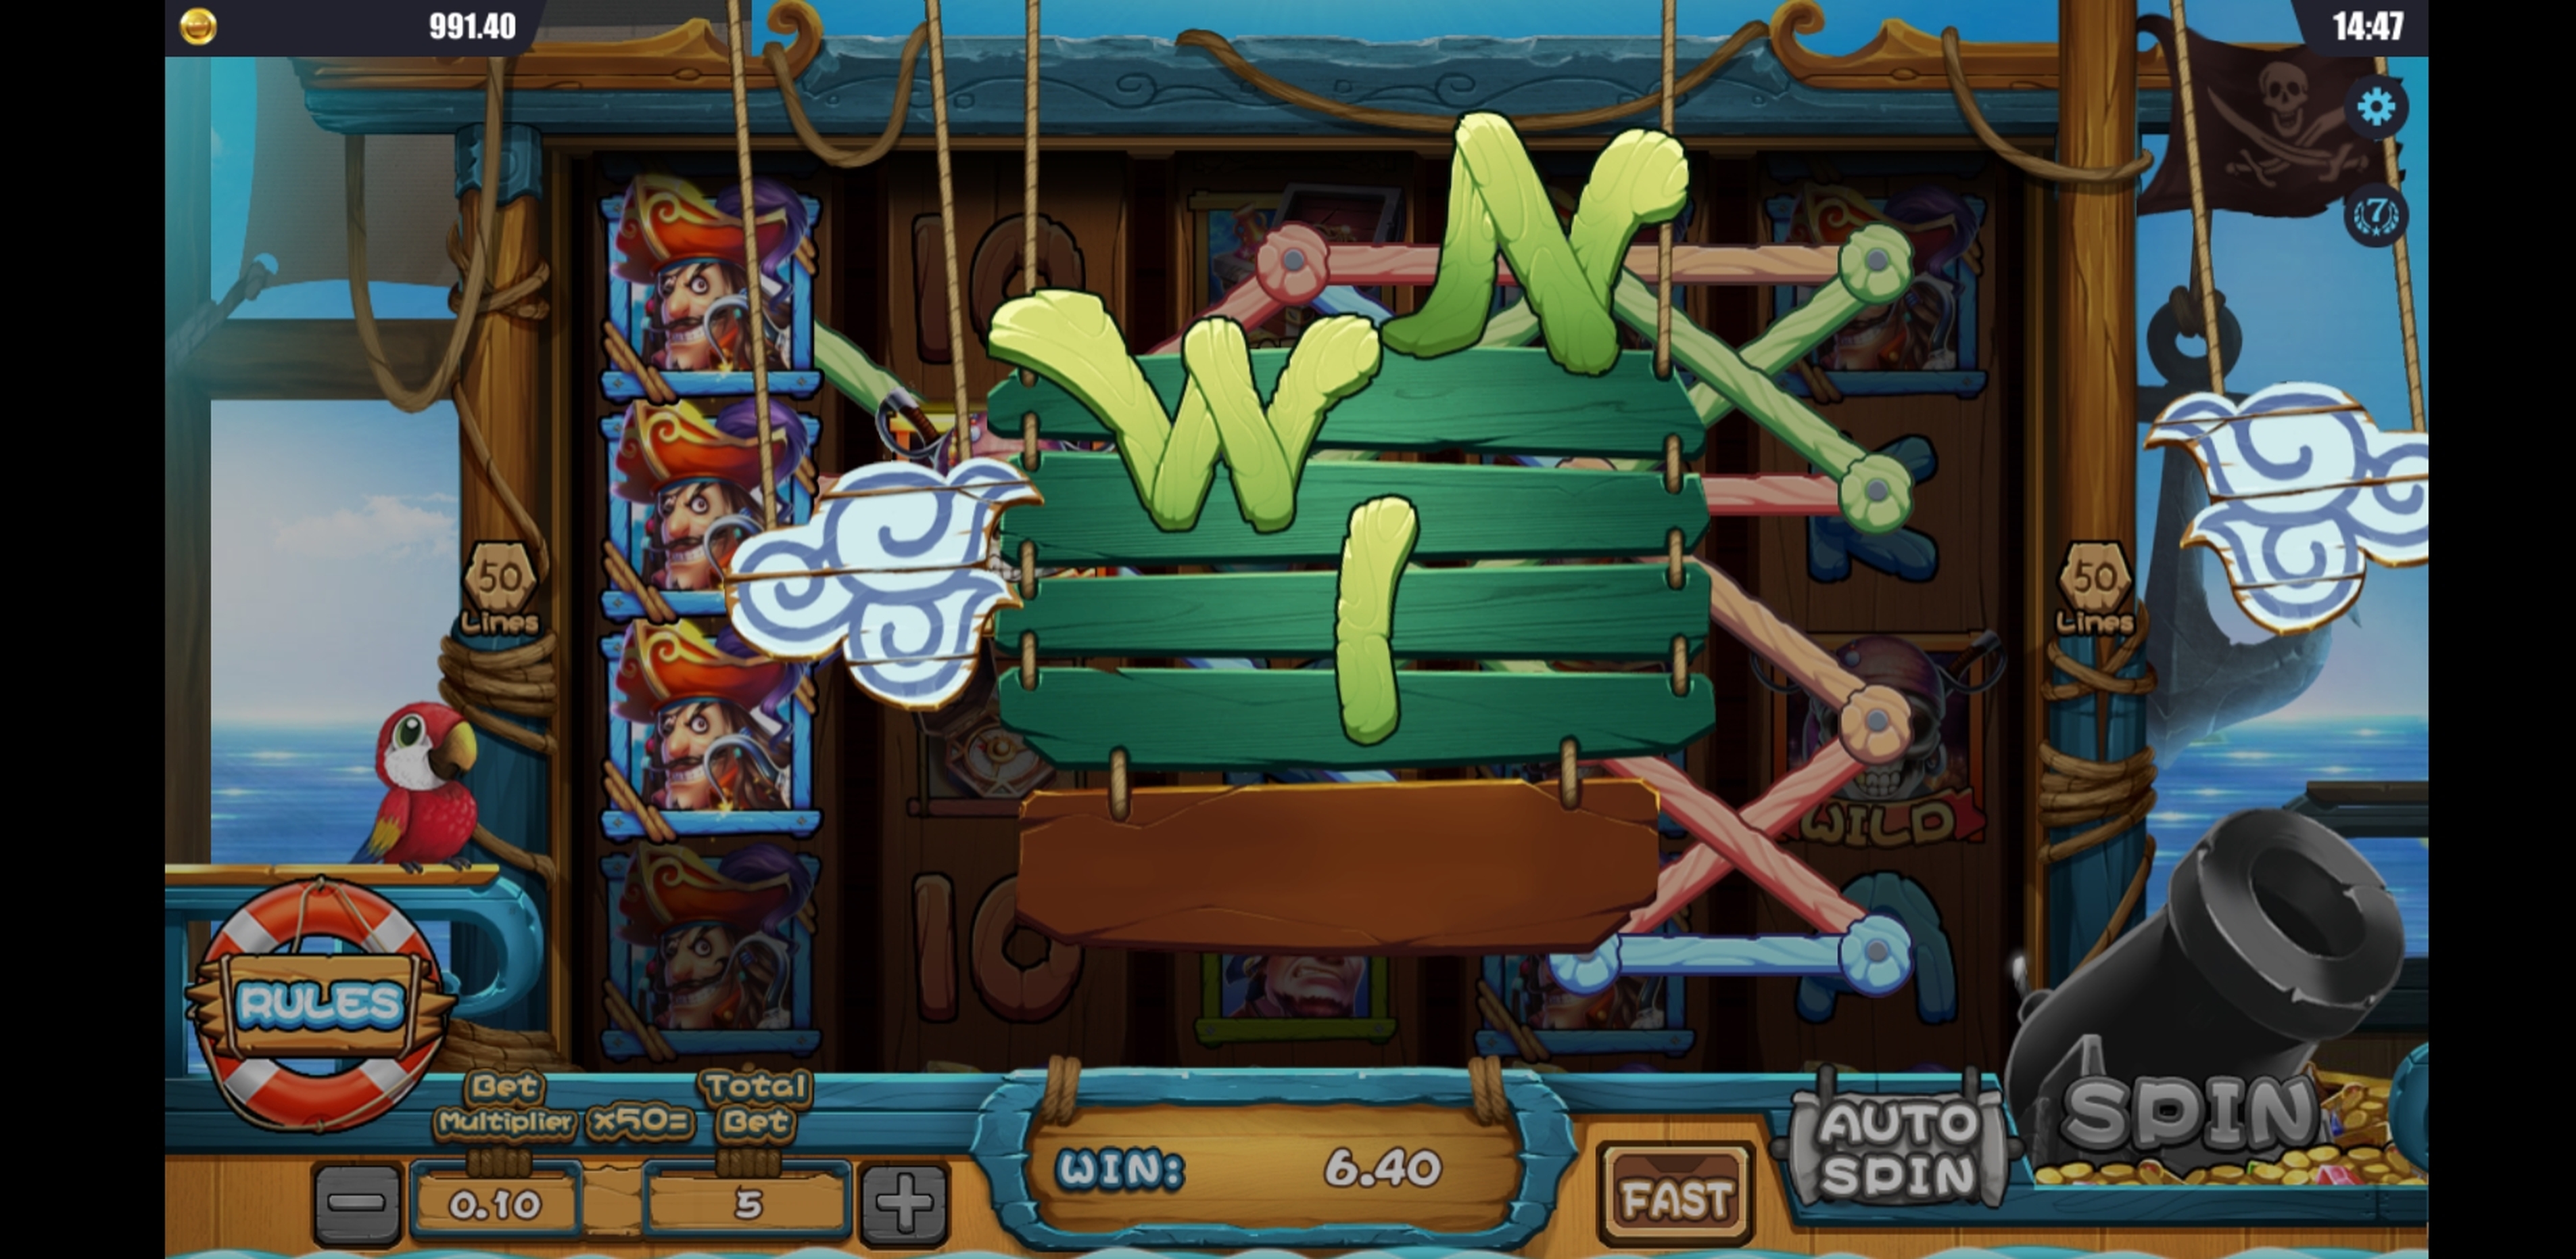 Win Money in Pirate's Treasure Free Slot Game by Gameplay Interactive